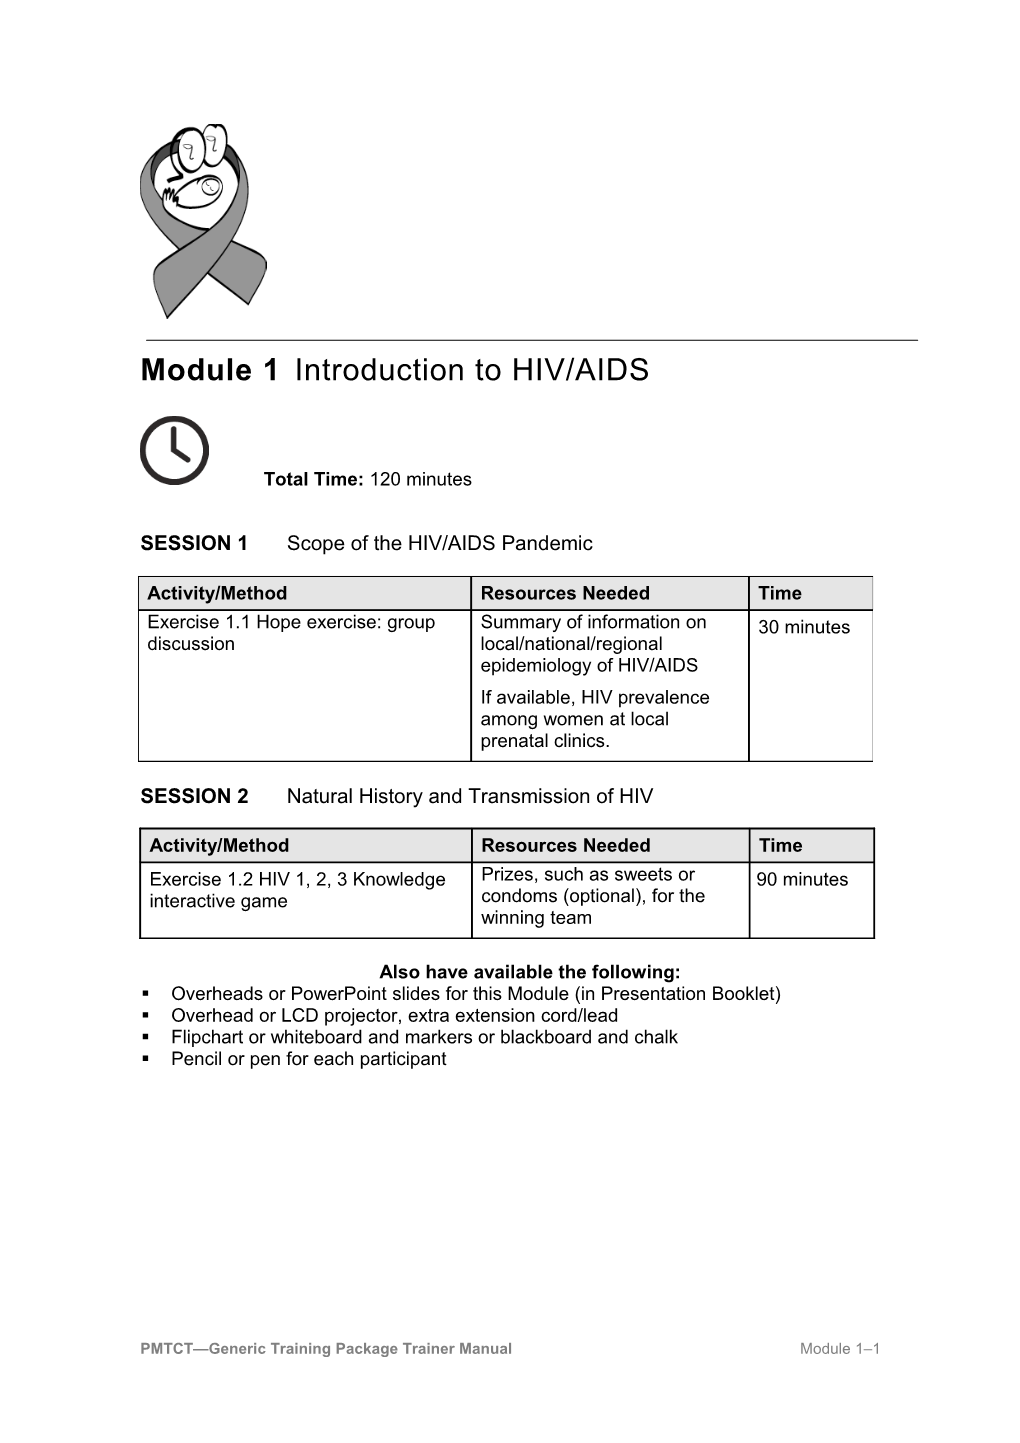 Module 1 Introduction to HIV/AIDS